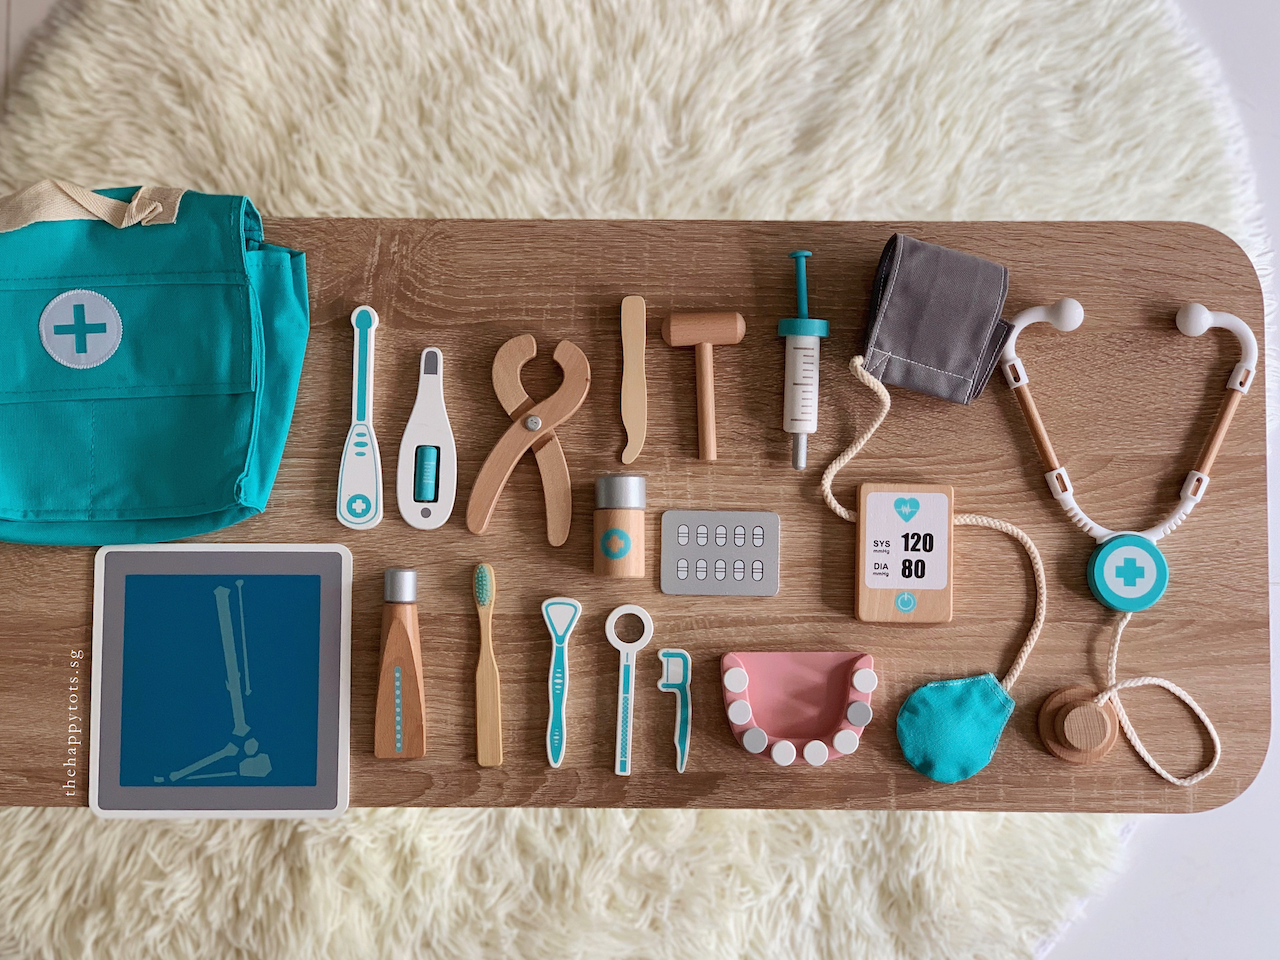 [GIFT SET] I Want to Be a Doctor/Dentist! - WERONE